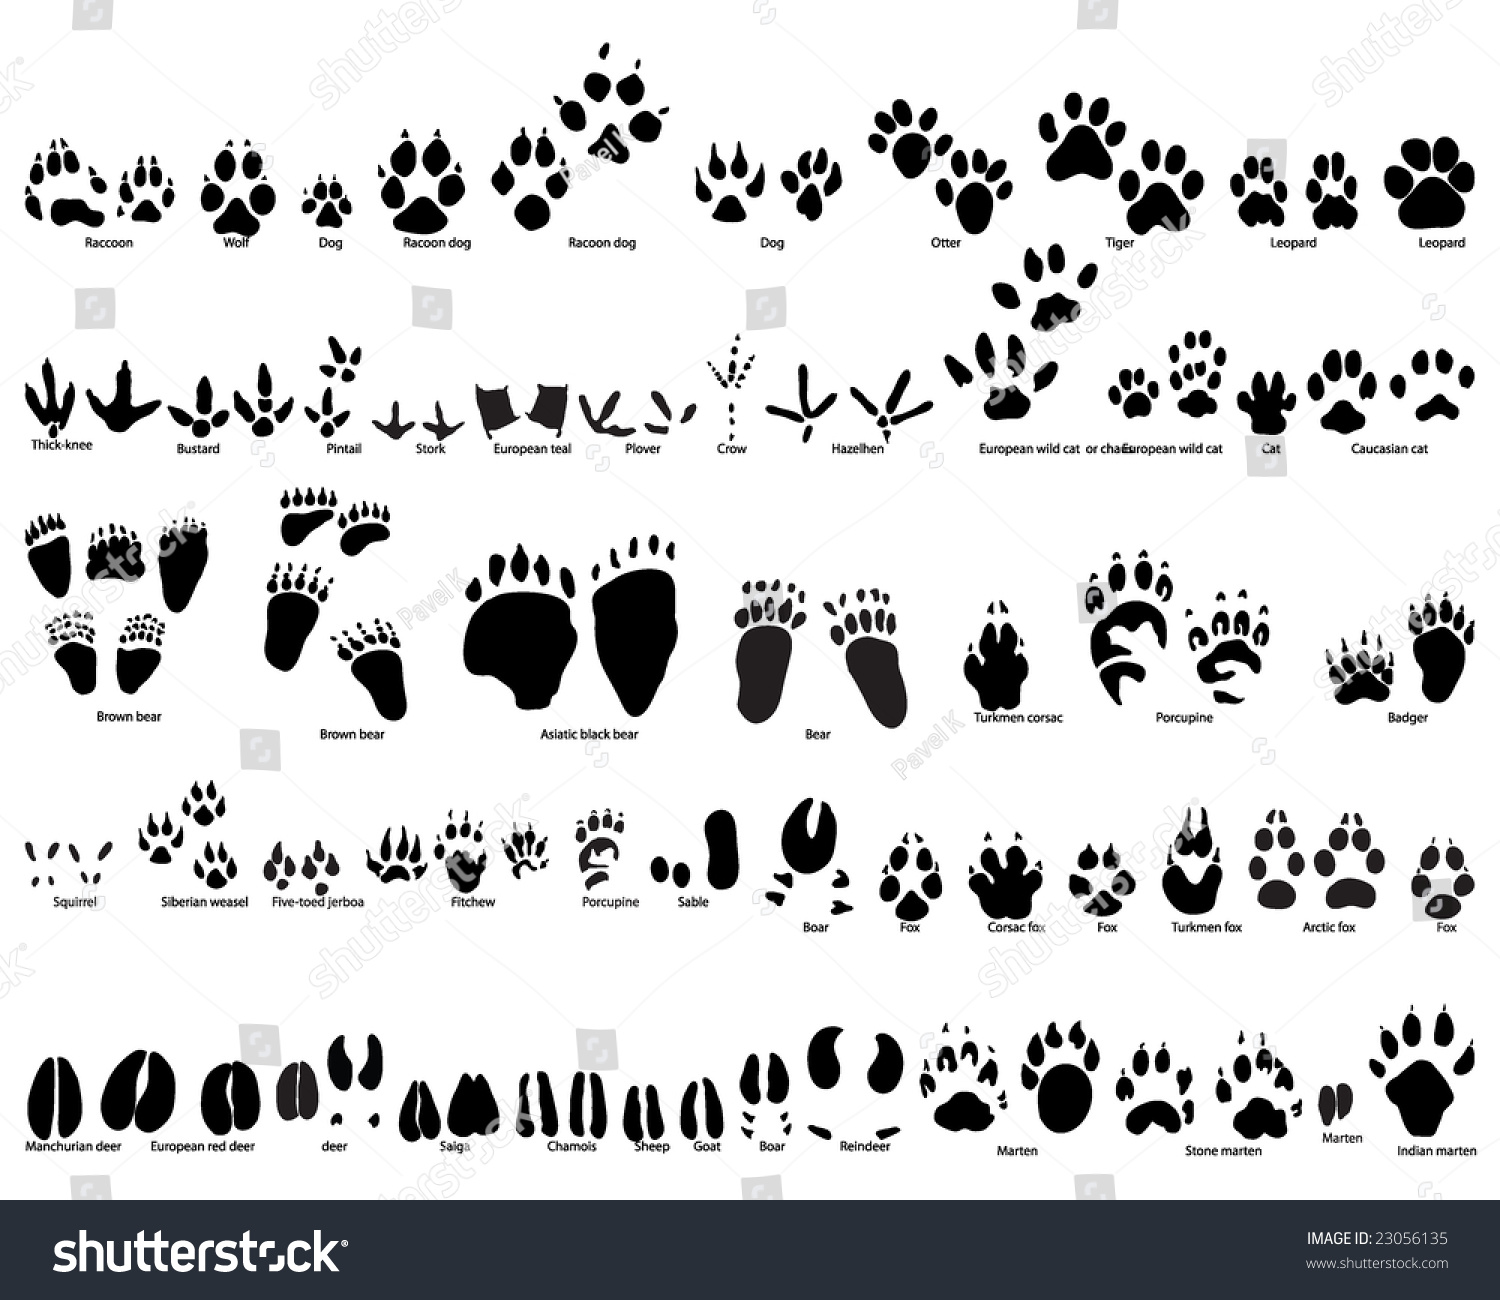 SVG of Biggest Set of Animal and Bird Trails Silhouettes With Title About Kind of Animals. Bears, Wolves, Many Kind of Different Birds and Other Fauna Represented in Set. High Detail. Vector Illustration.  svg